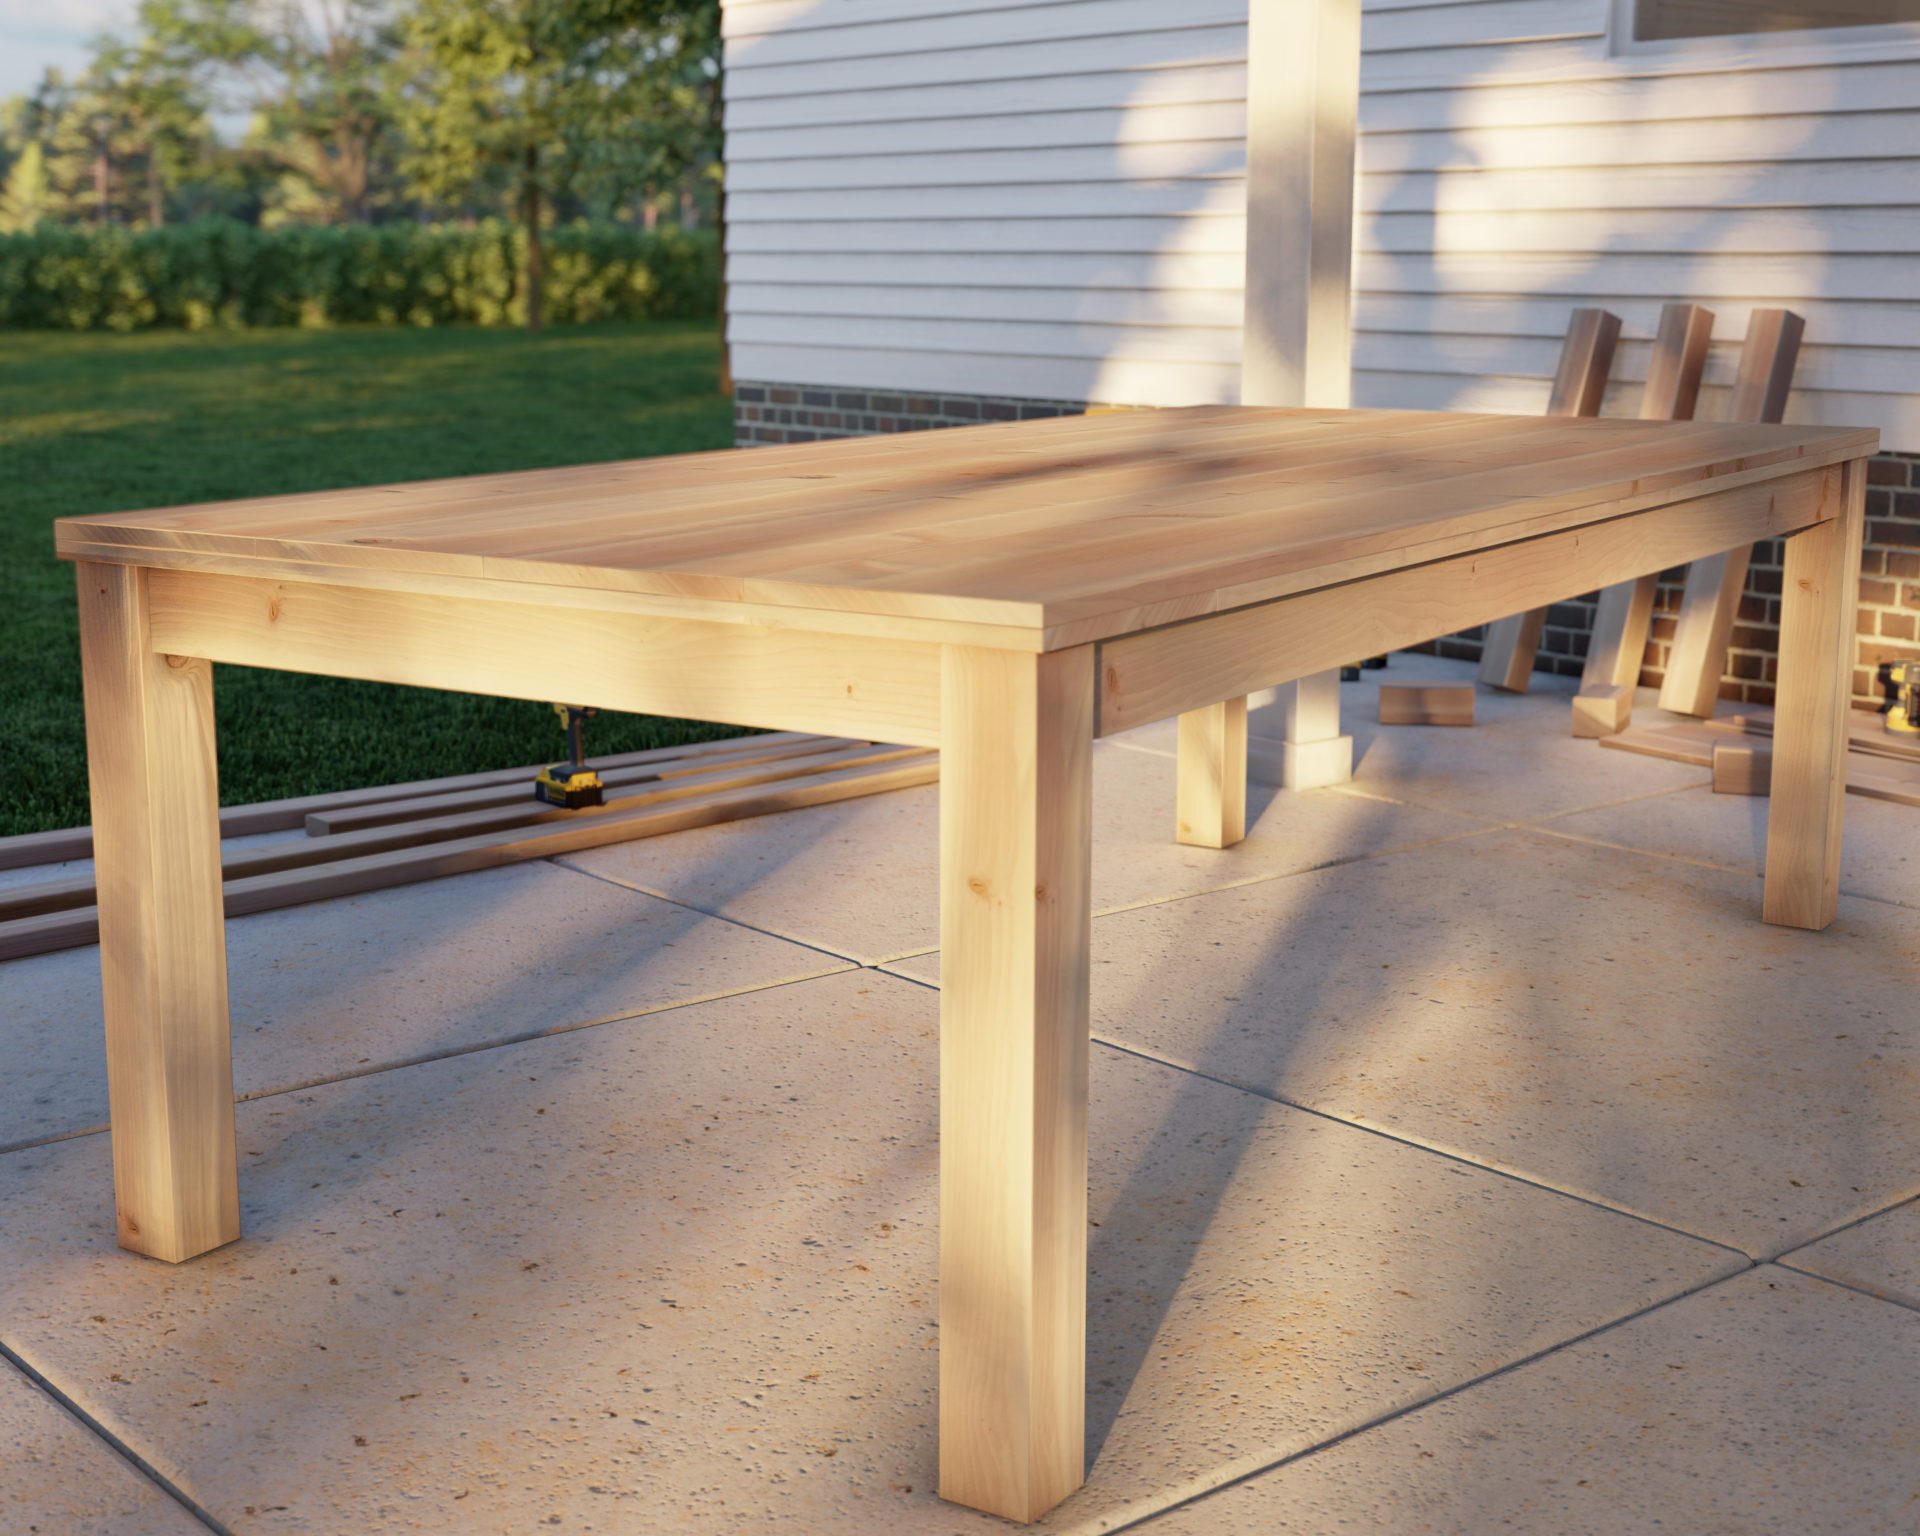 How to Make a Wooden Table? A Step-by-Step Guide